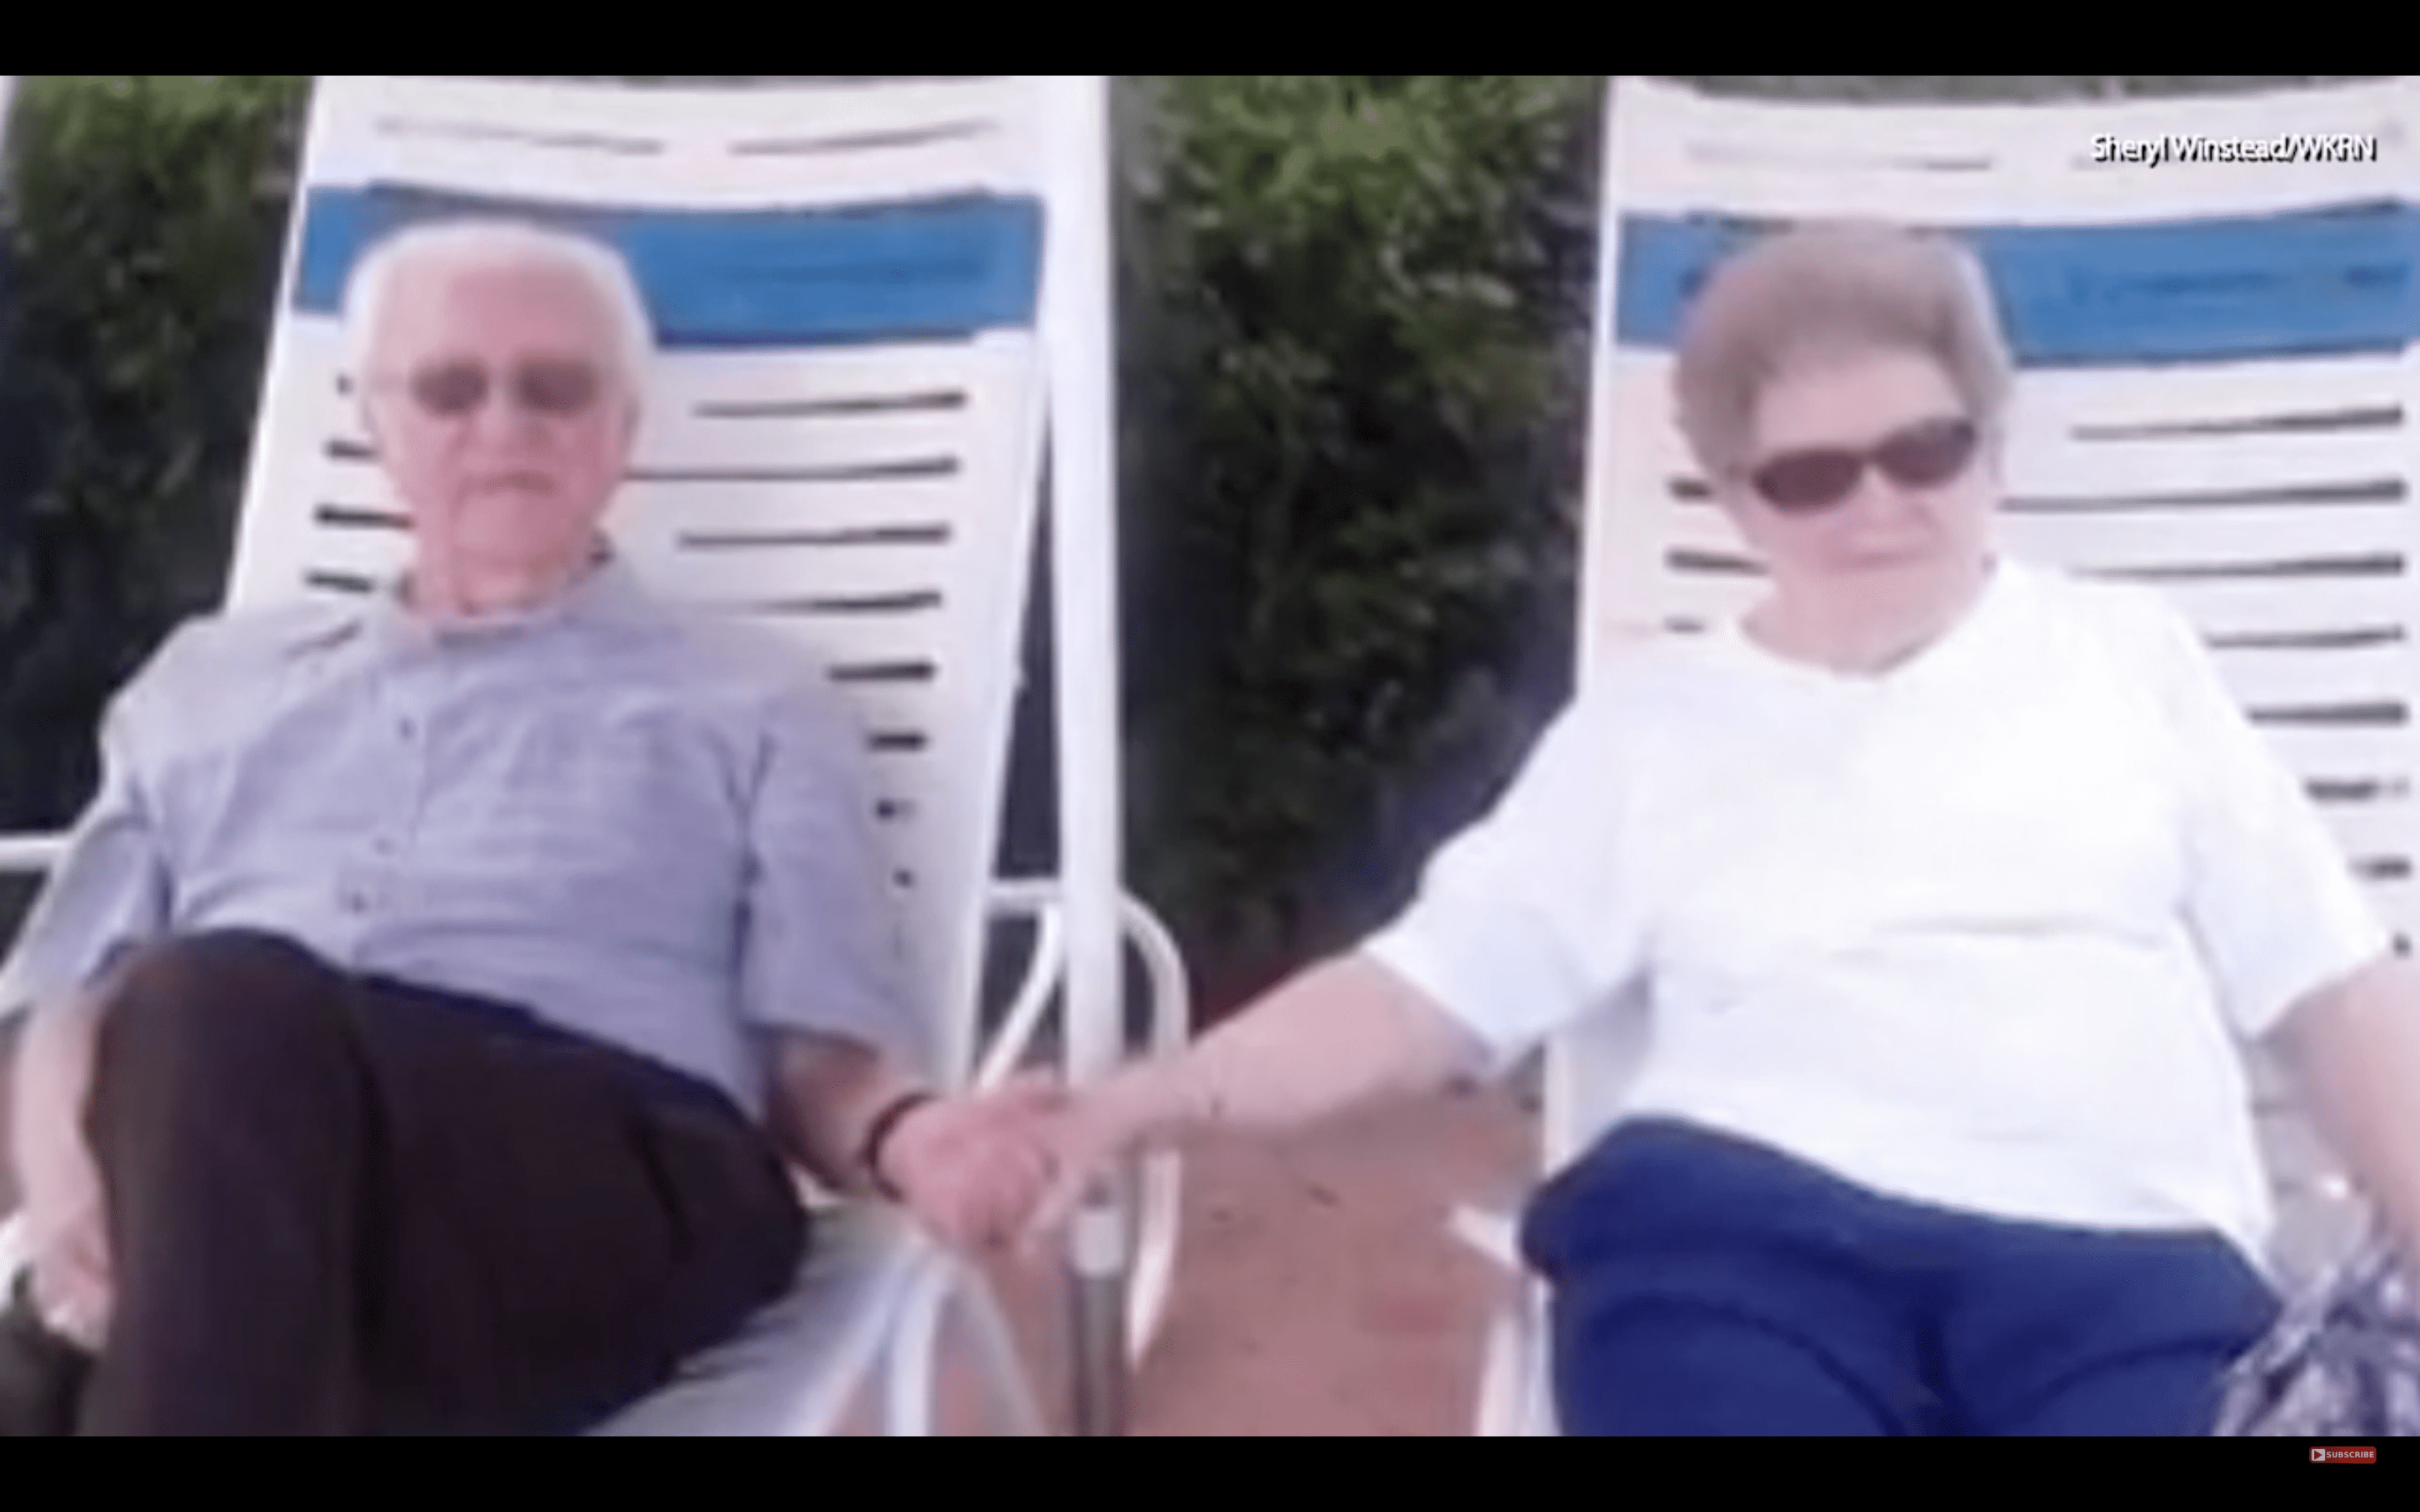 Trent and Dolores Winstead sitting together, holding hands. | Photo: YouTube.com/WSB-TV